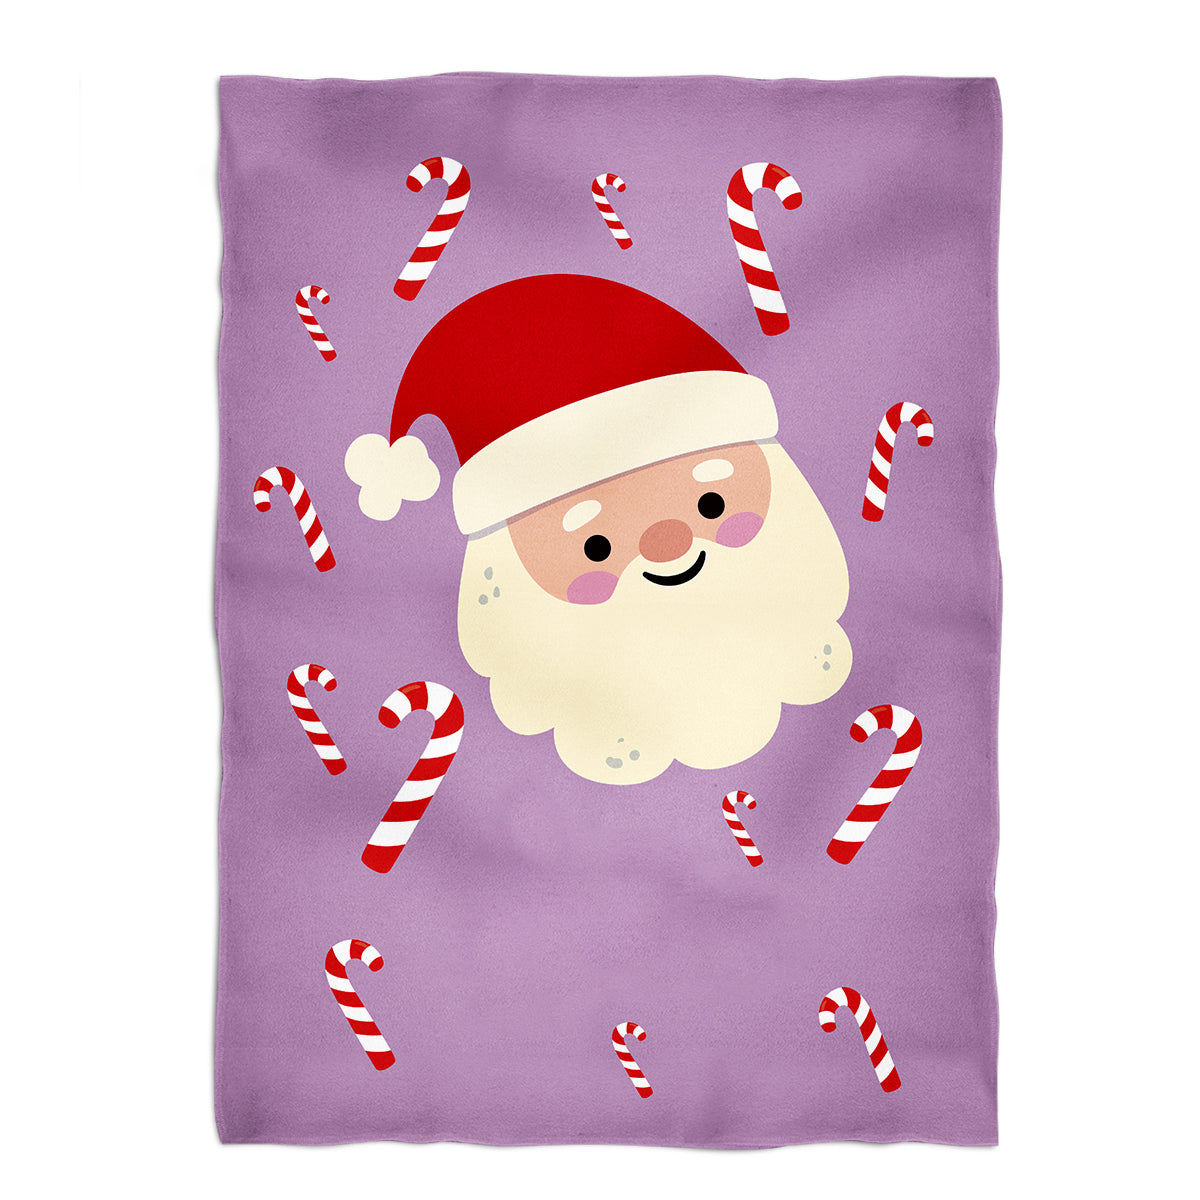 Santa and candy canes fleece blanket with name - Wimziy&Co.